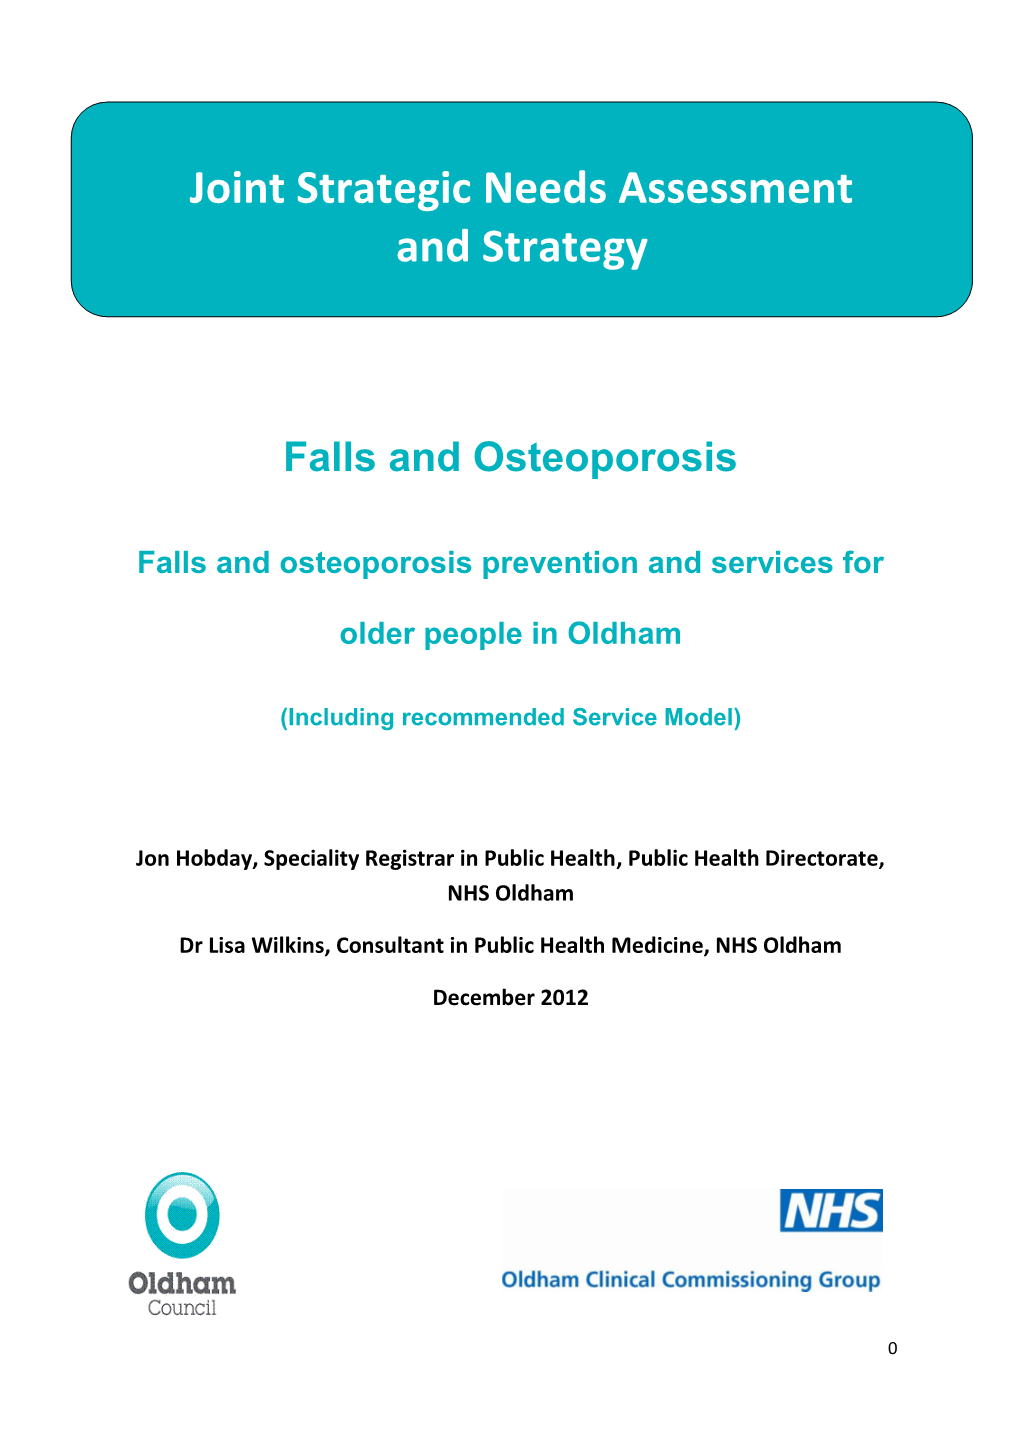 Falls and Osteoporosis